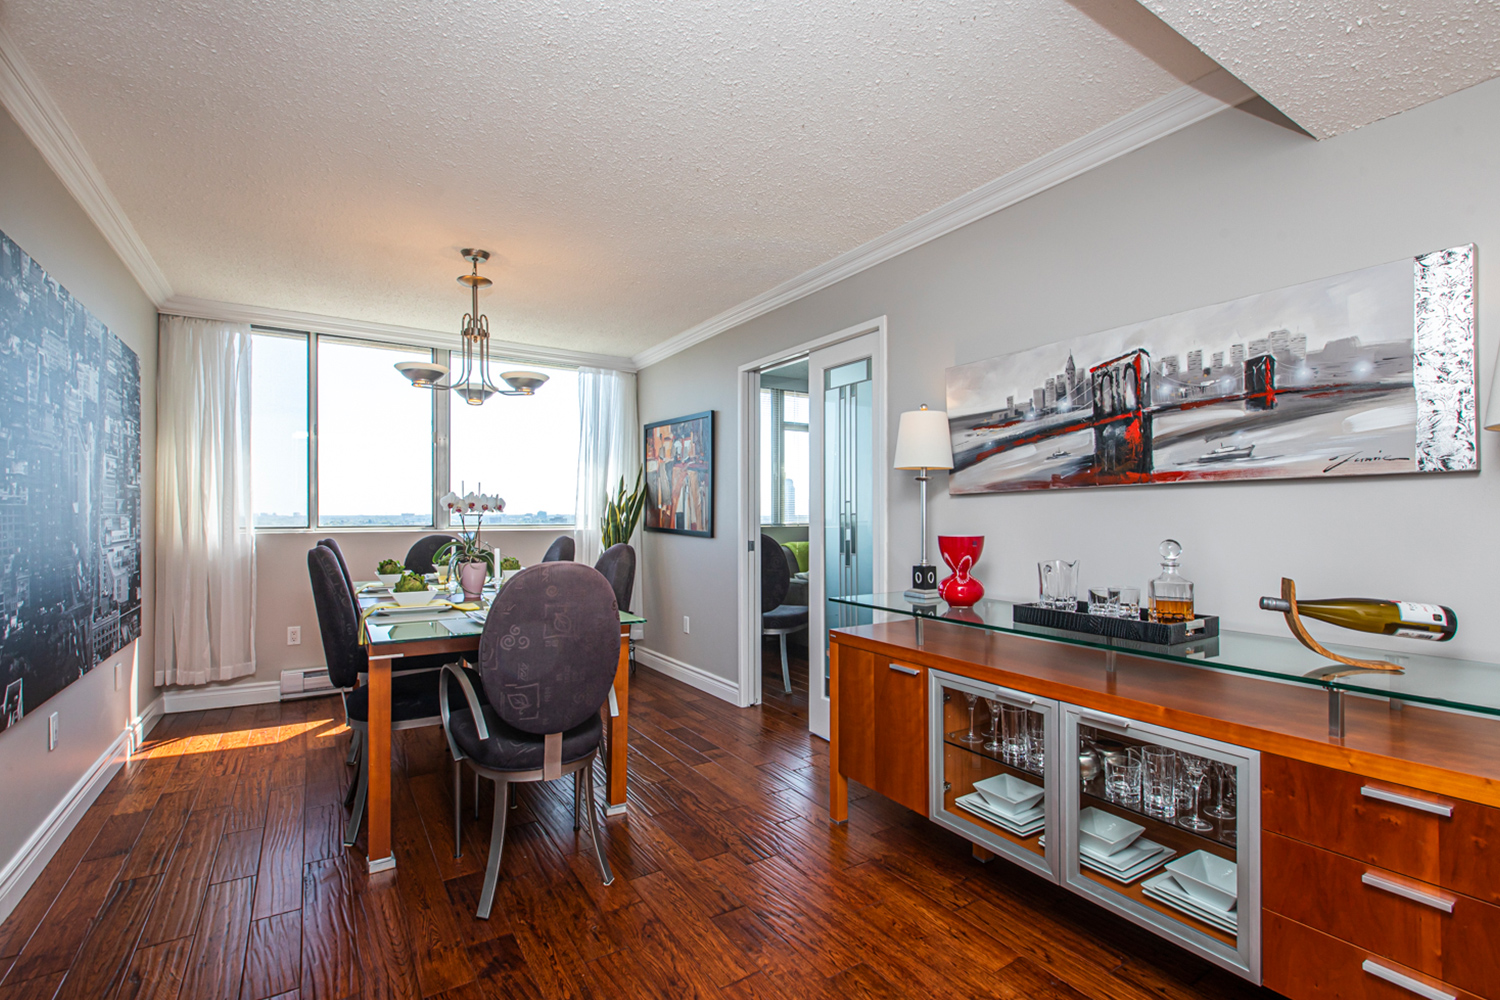 Listing__1530-530-Laurier-Ave-W__06